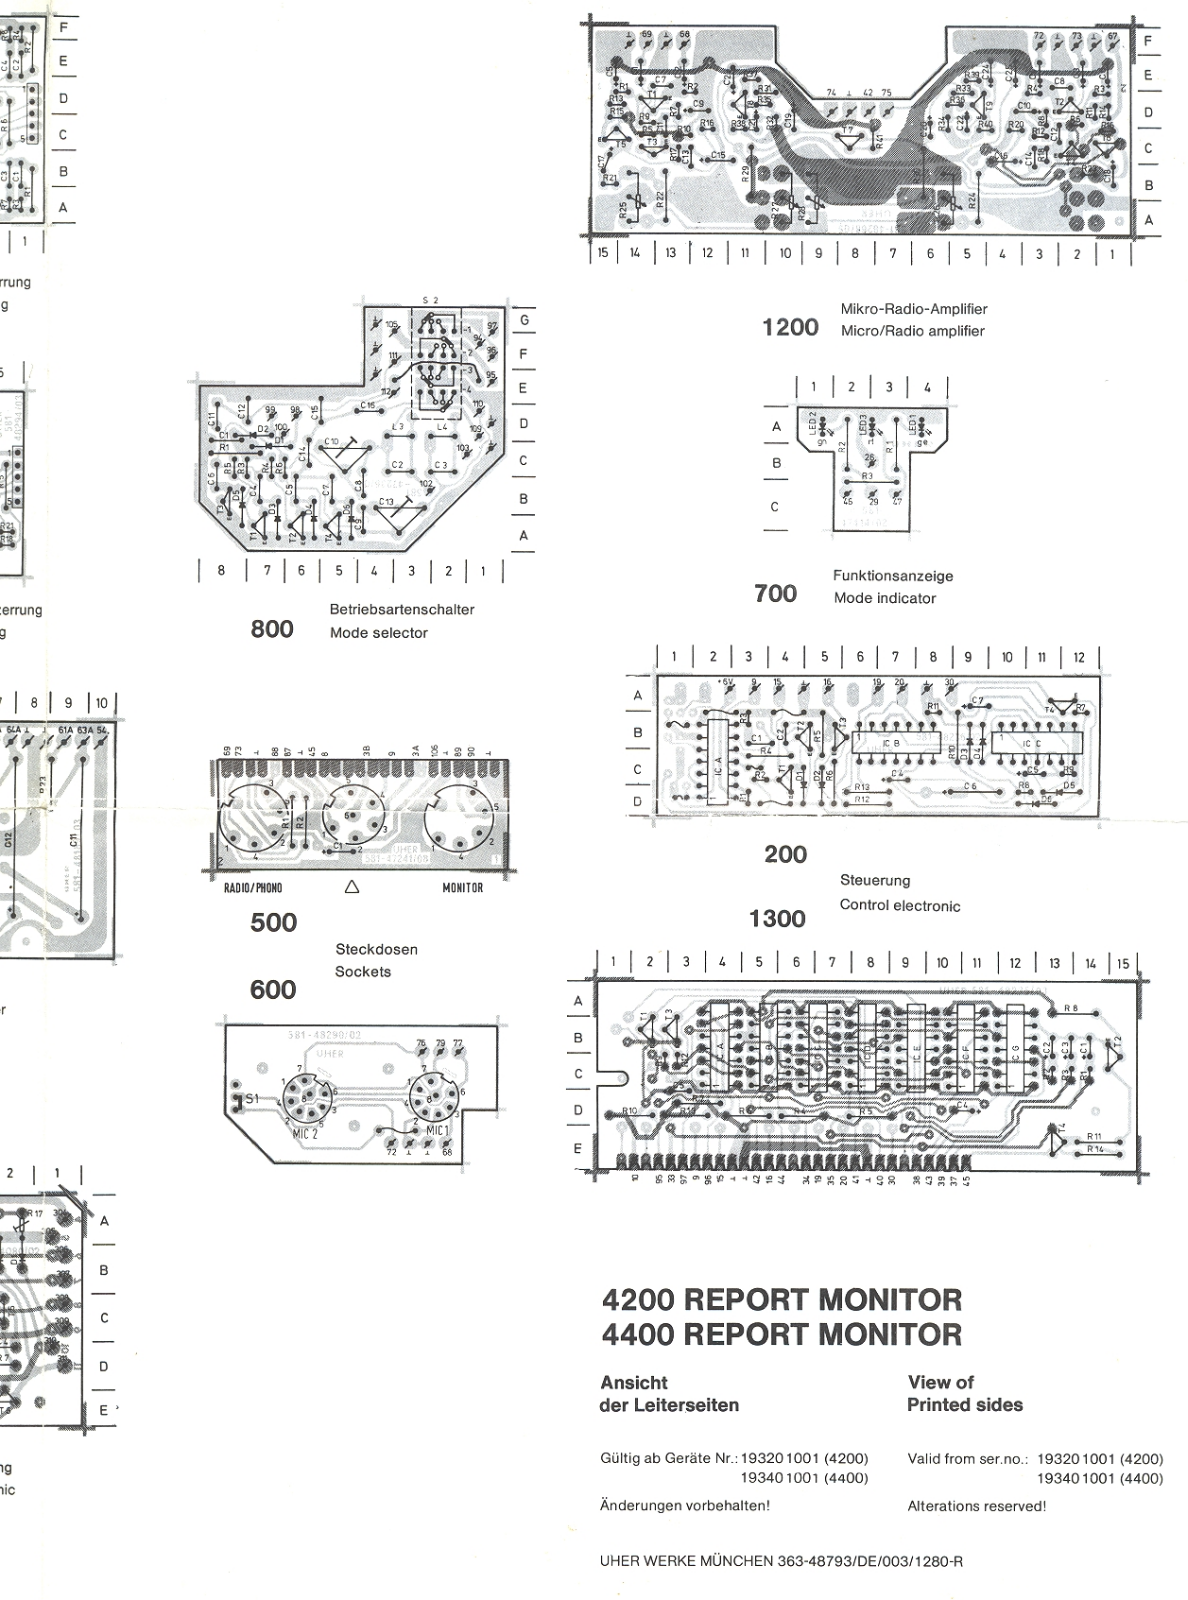 Uher 4200 Report Monitor Schematic